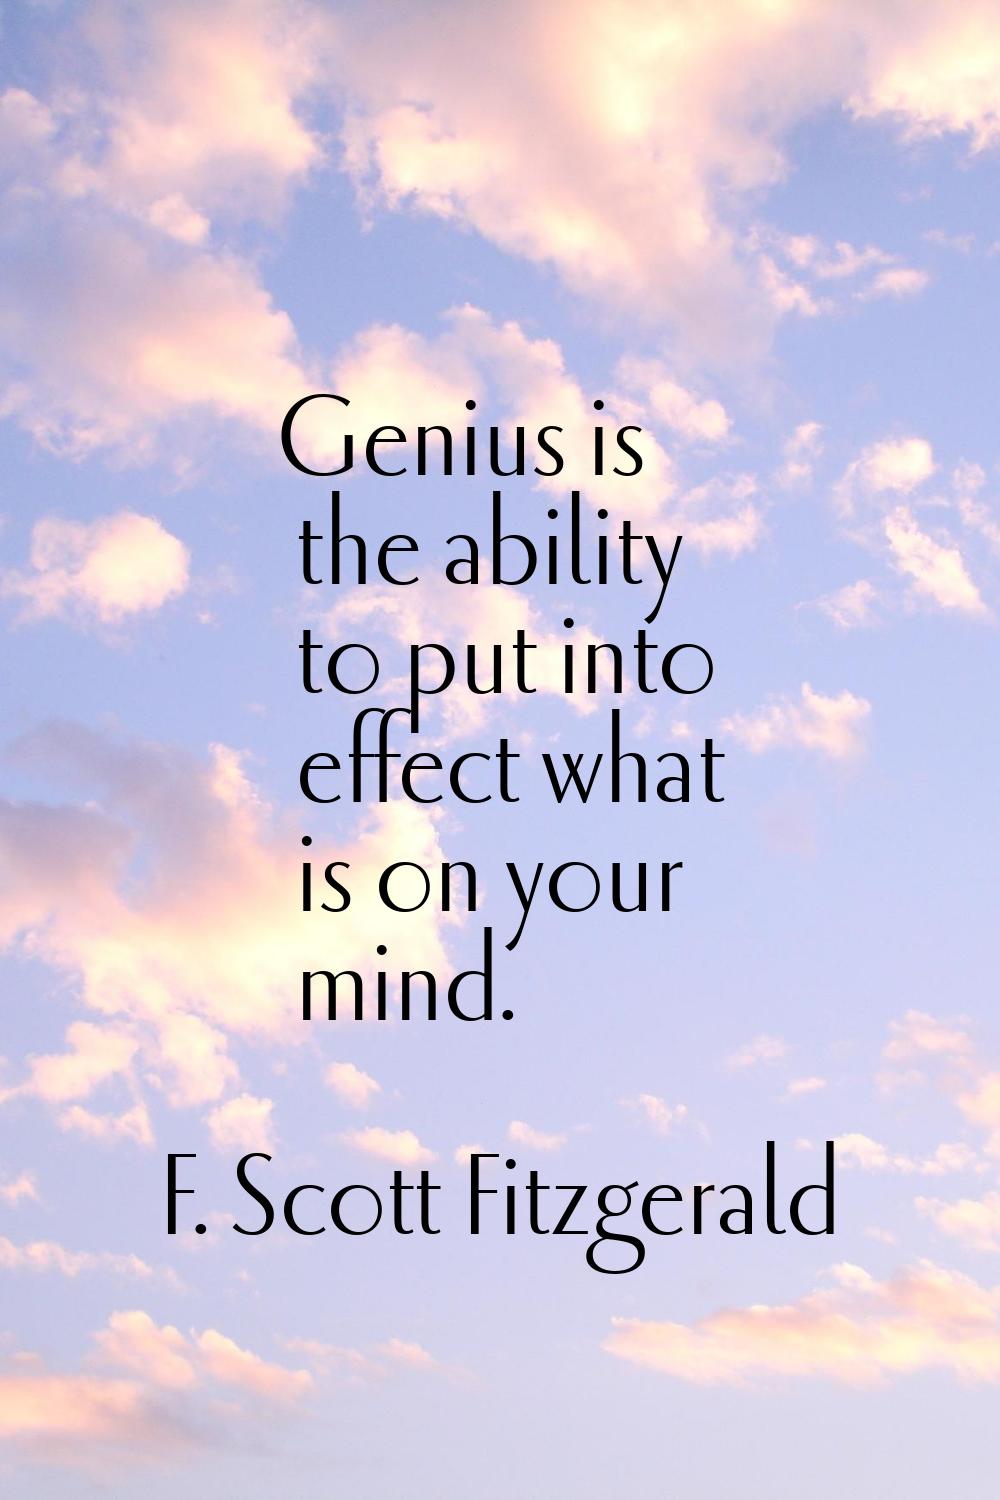 Genius is the ability to put into effect what is on your mind.